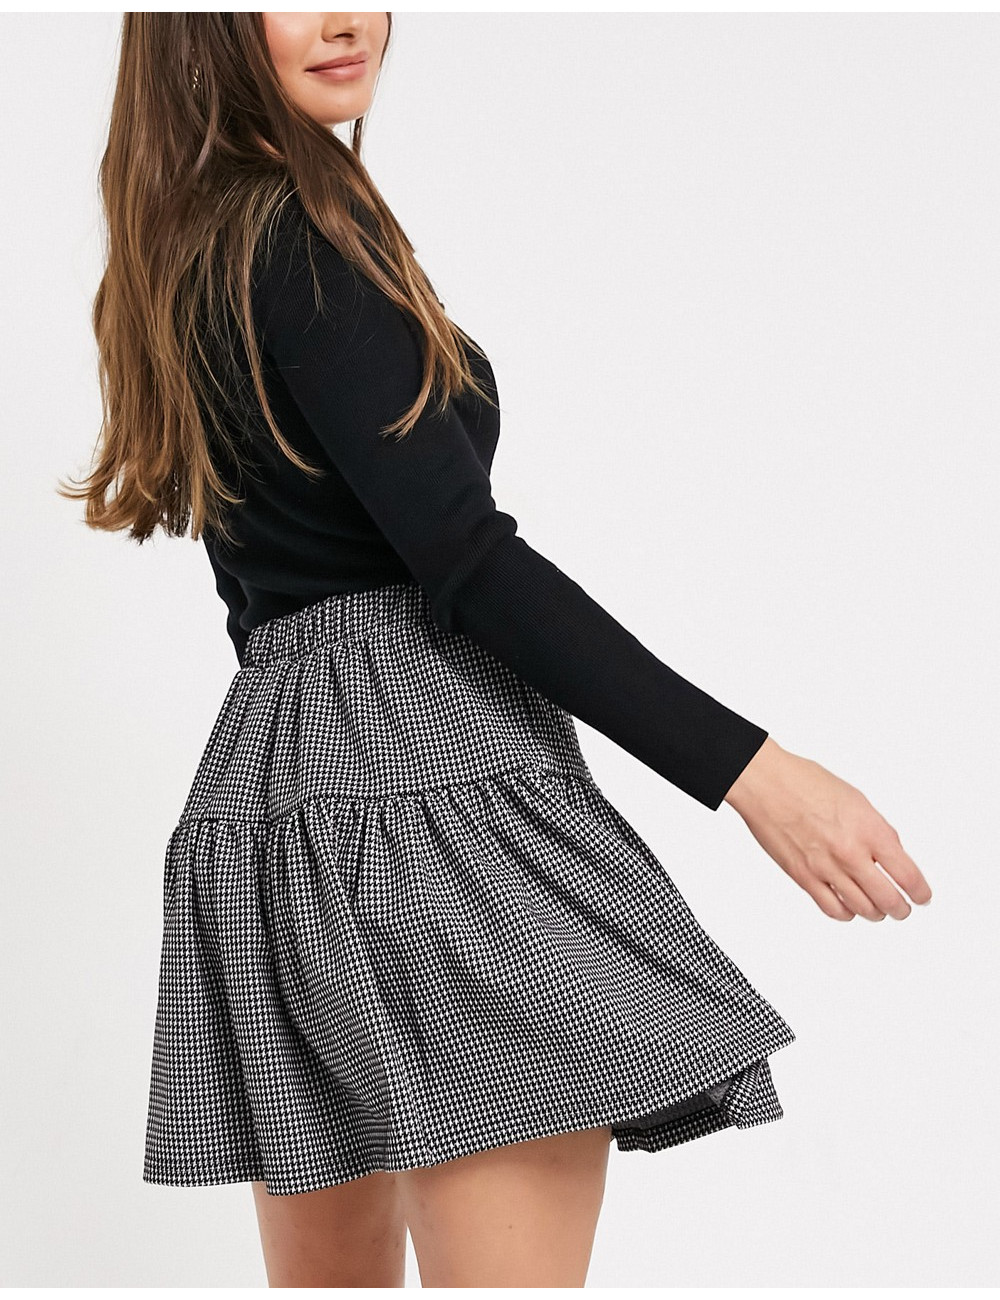 Y.A.S mini skirt co-ord...